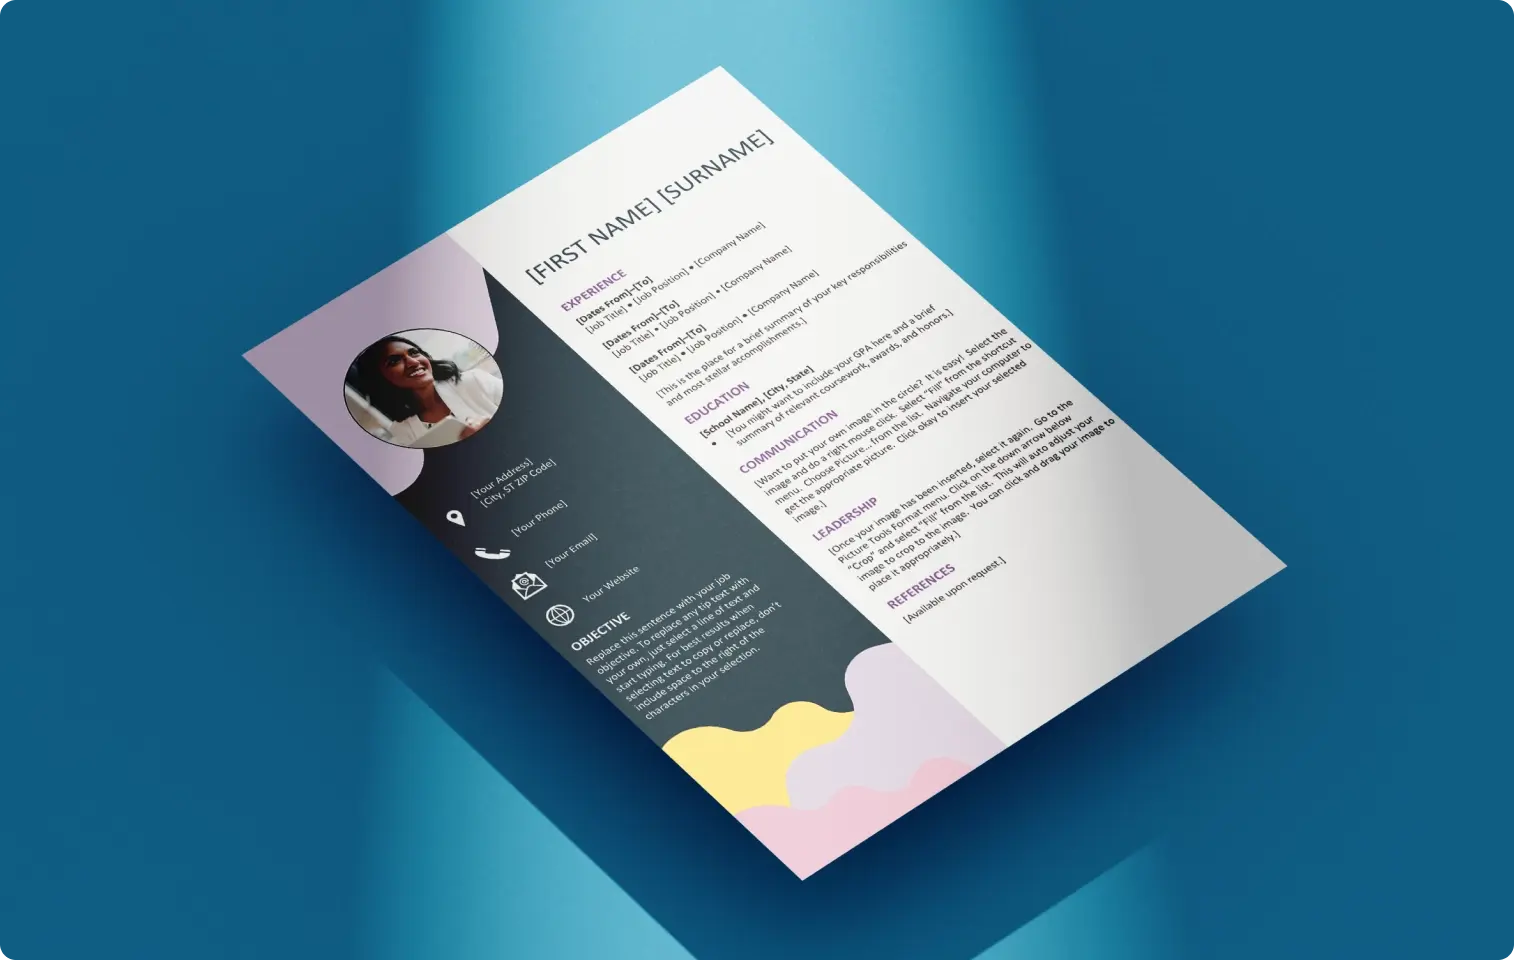 Printed resume based on a template from Microsoft Create.